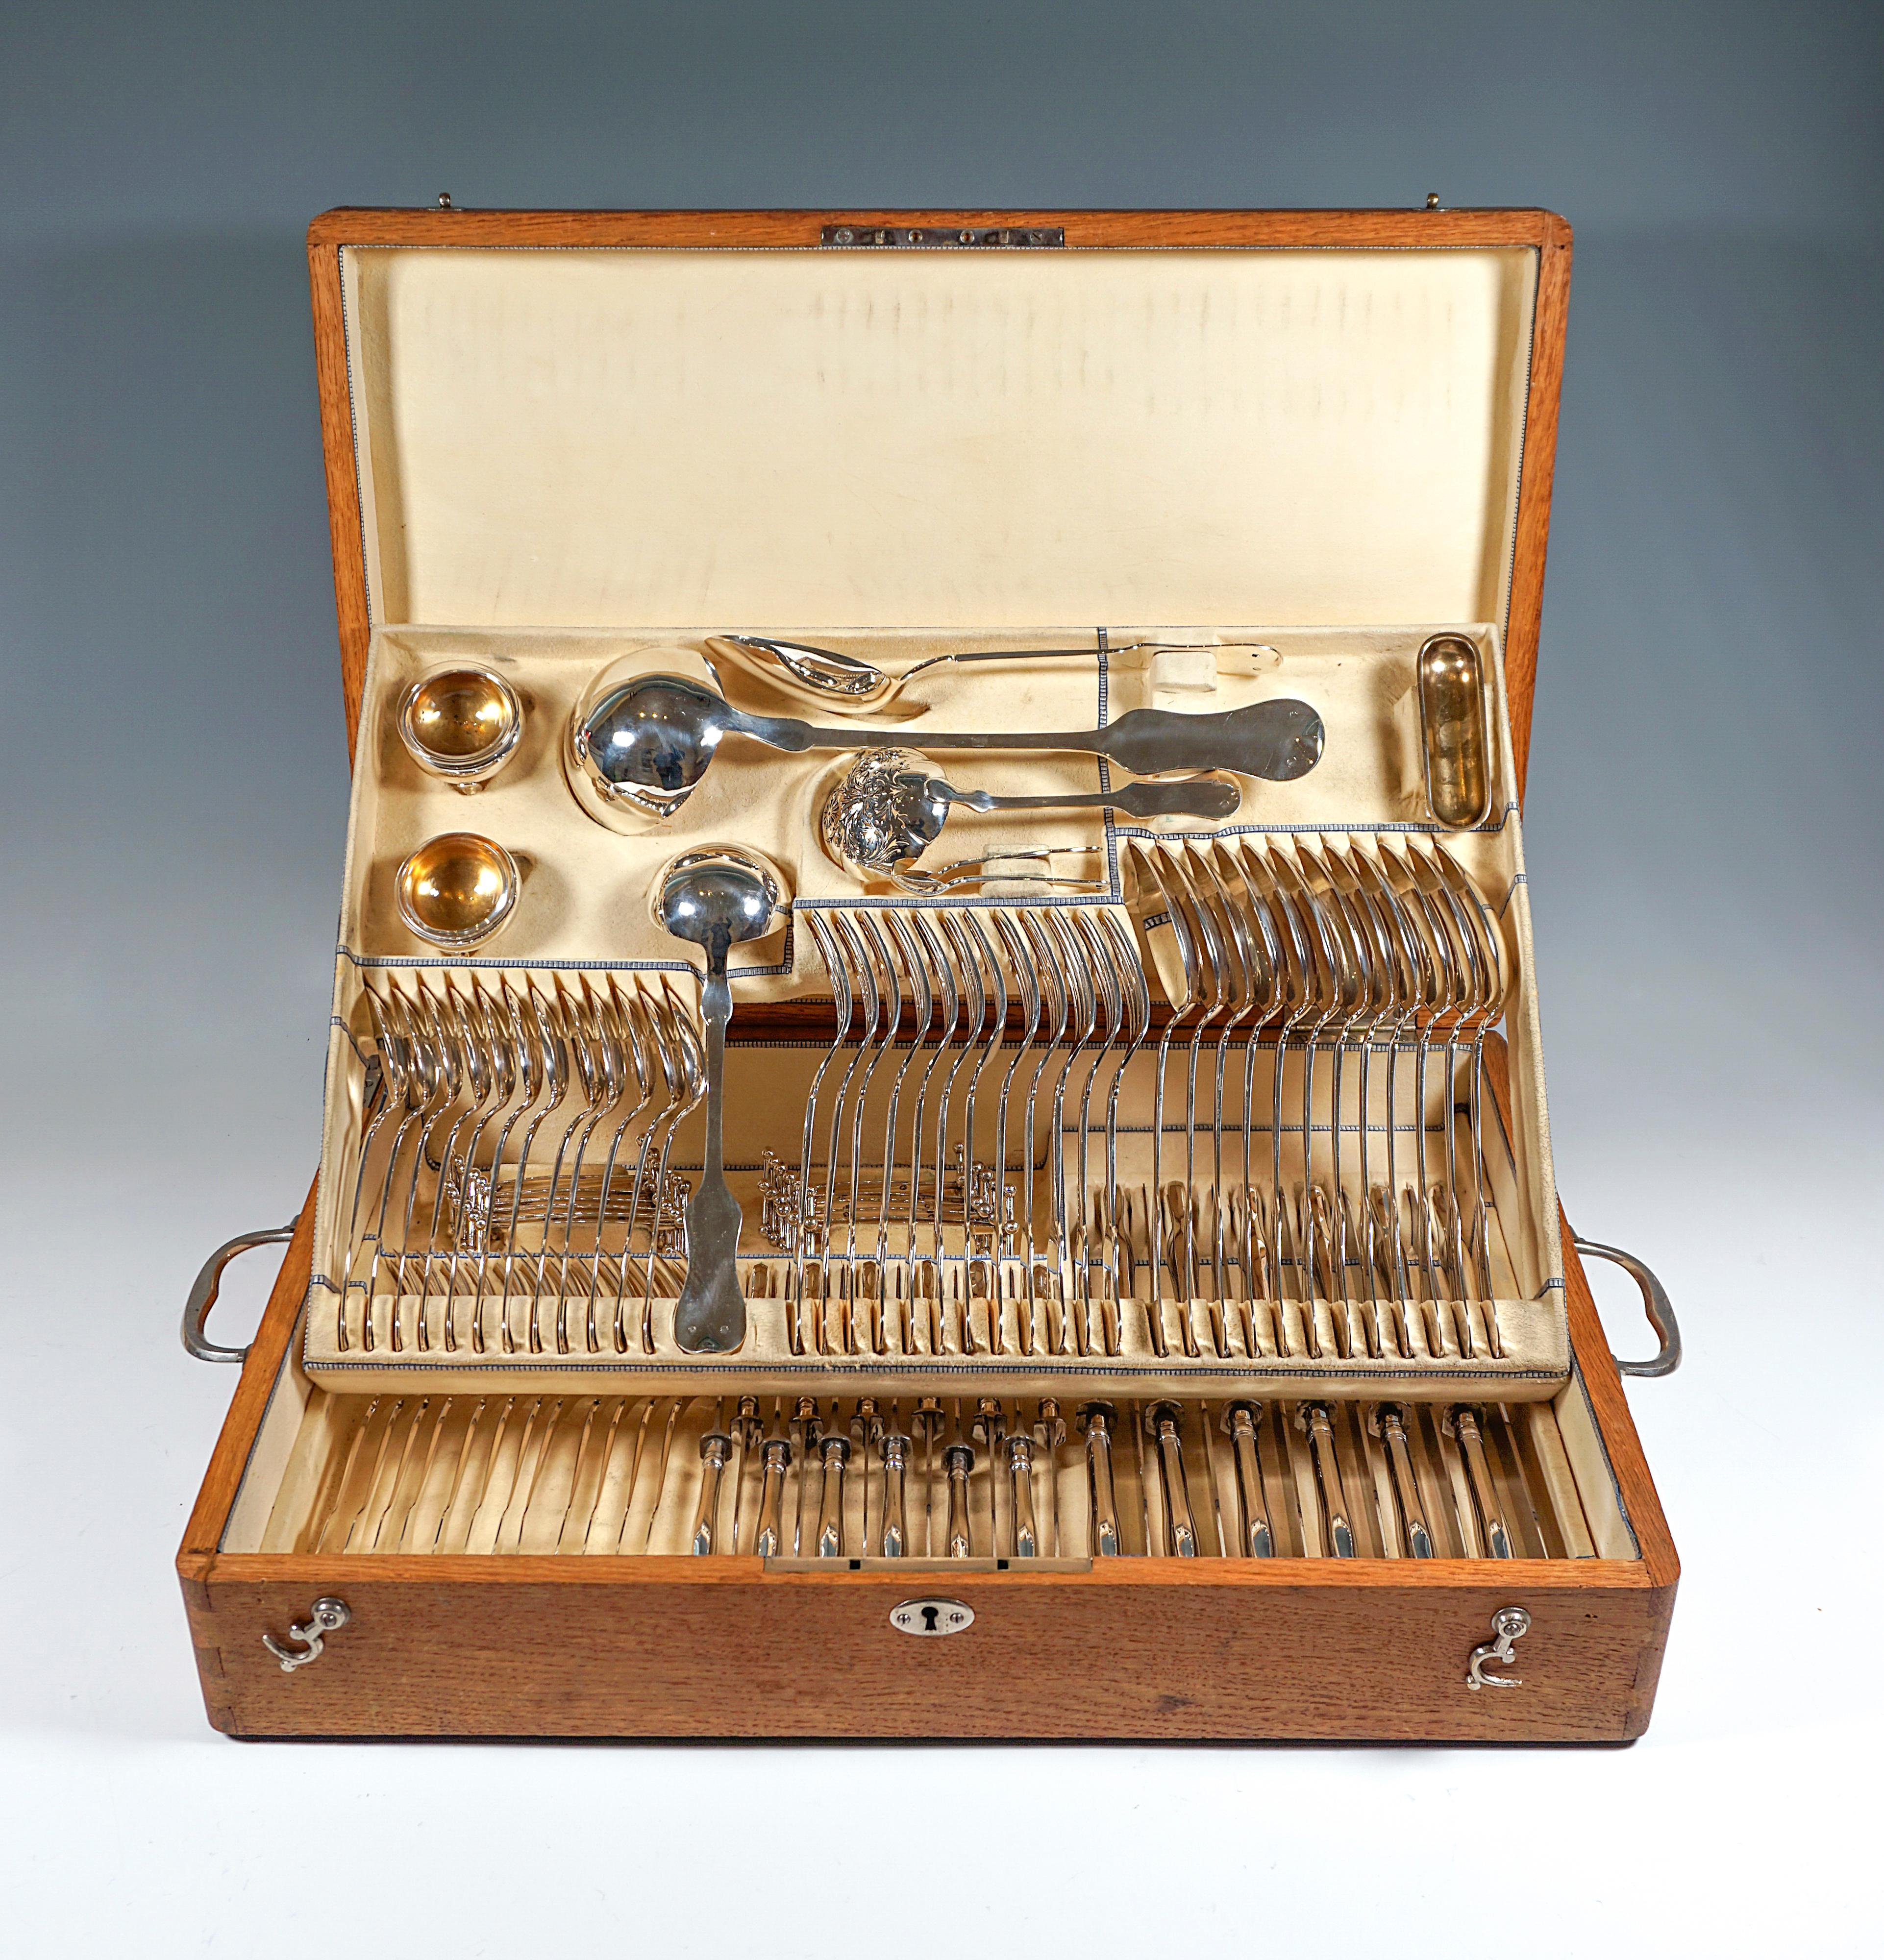 Elegant cutlery Set Made Of Solid Silver For Twelve People Consisting Of 93 Parts in original wooden box.
 
Date of manufactory:  circa 1890

Material:   Massive silver '800'

Form type:  Decent smooth, simple design called 'Violin case', without